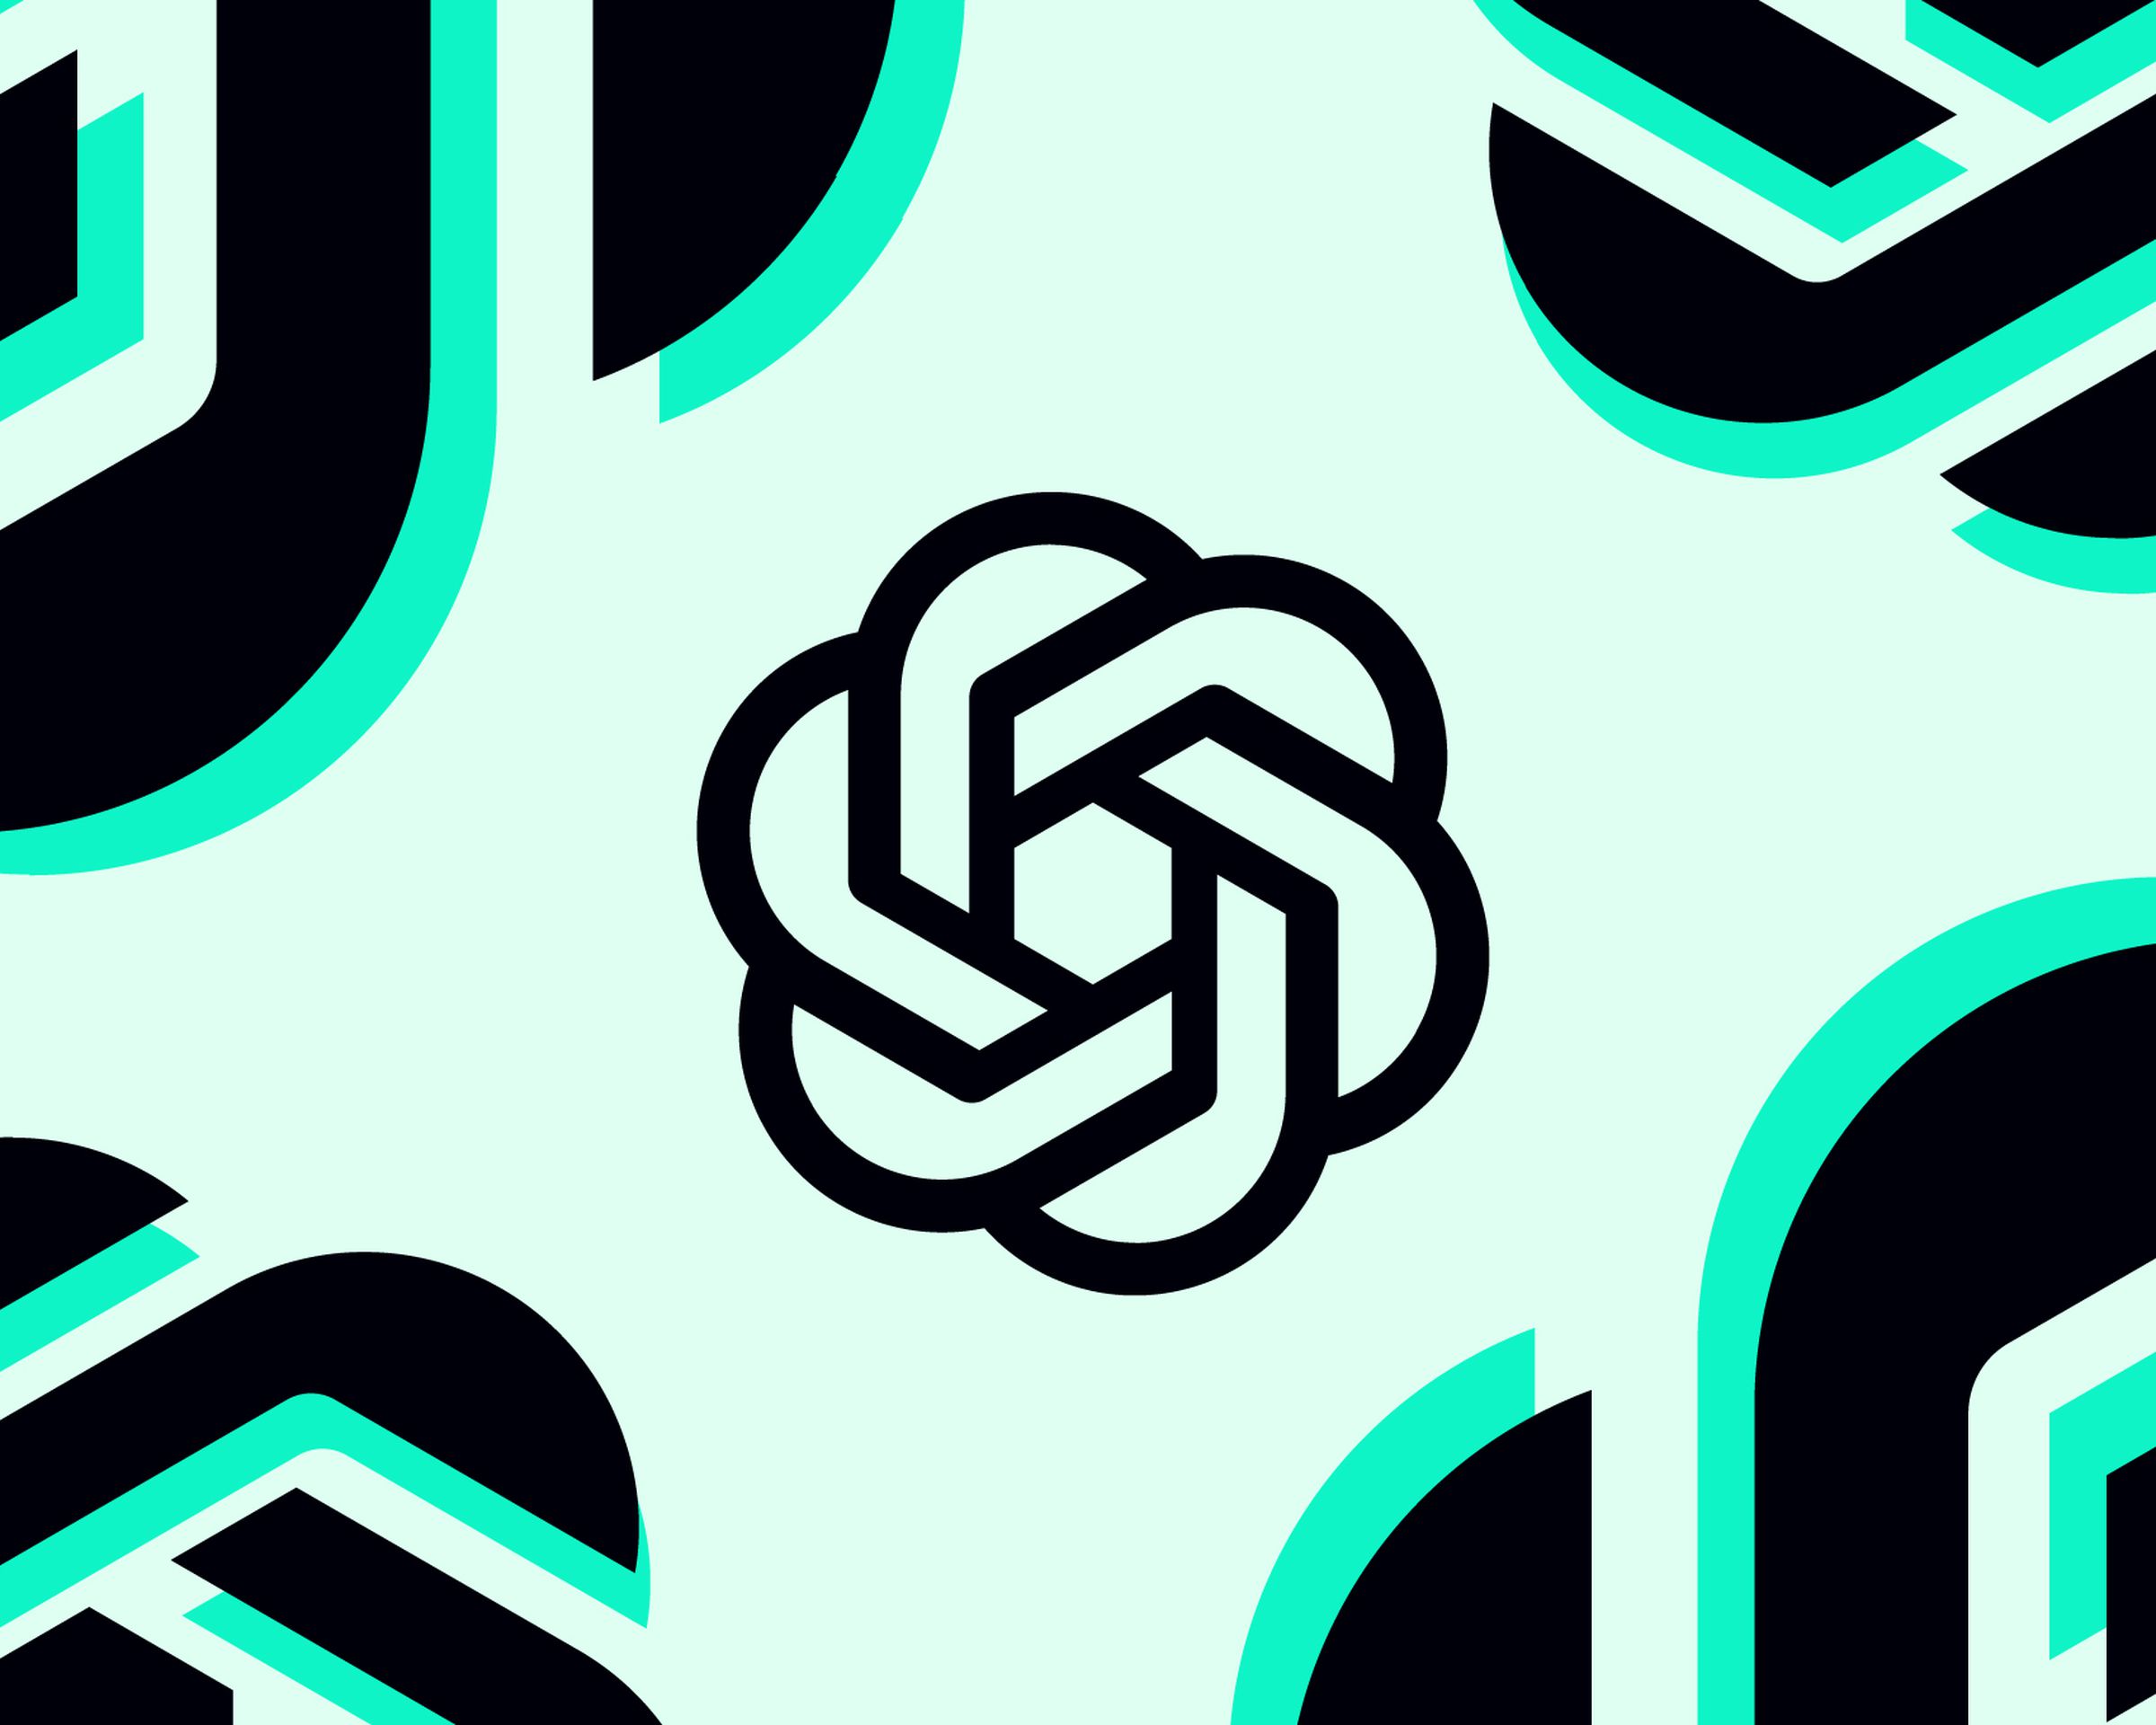 ChatGPT logo in mint green and black colors.